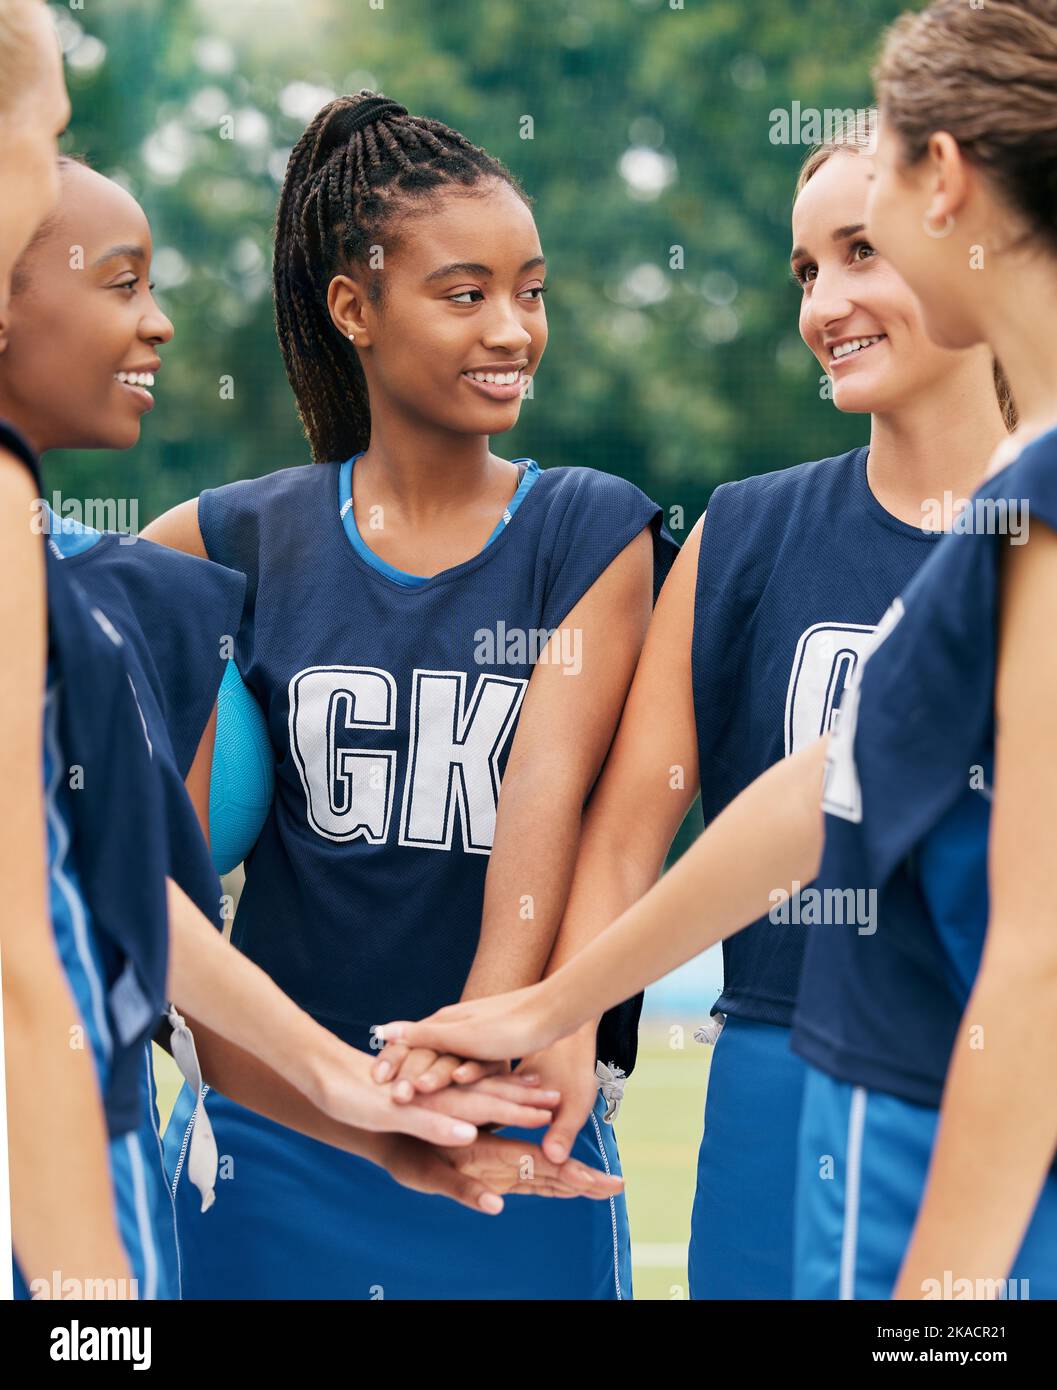 Support, teamwork and sports with netball women for motivation, planning and training on field. Happy, vision and goals with diversity of friends Stock Photo